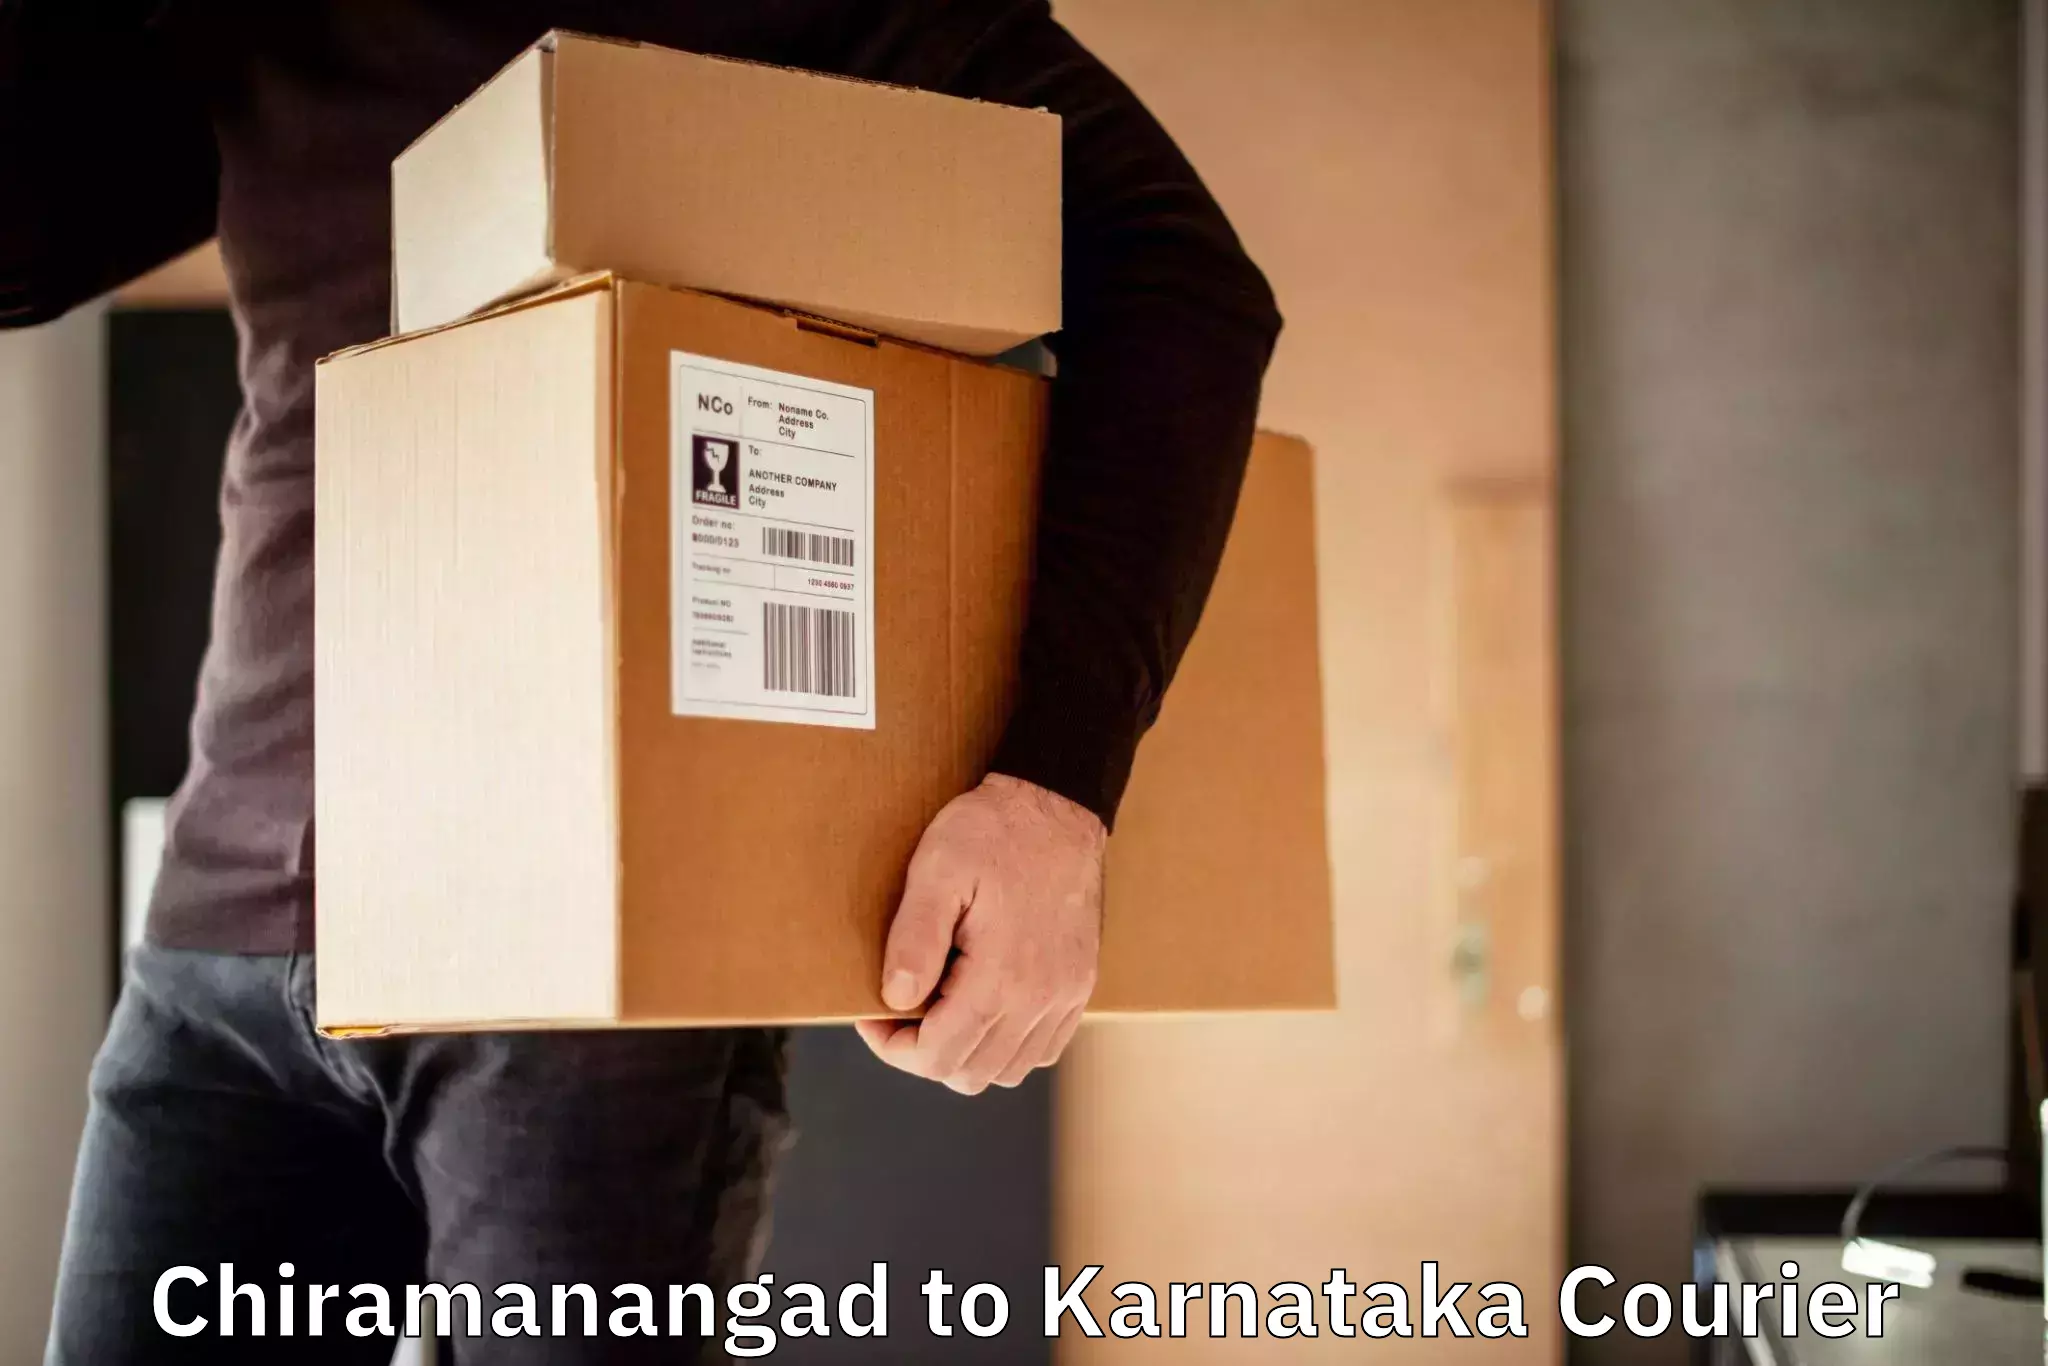 Urban courier service Chiramanangad to Mulbagal